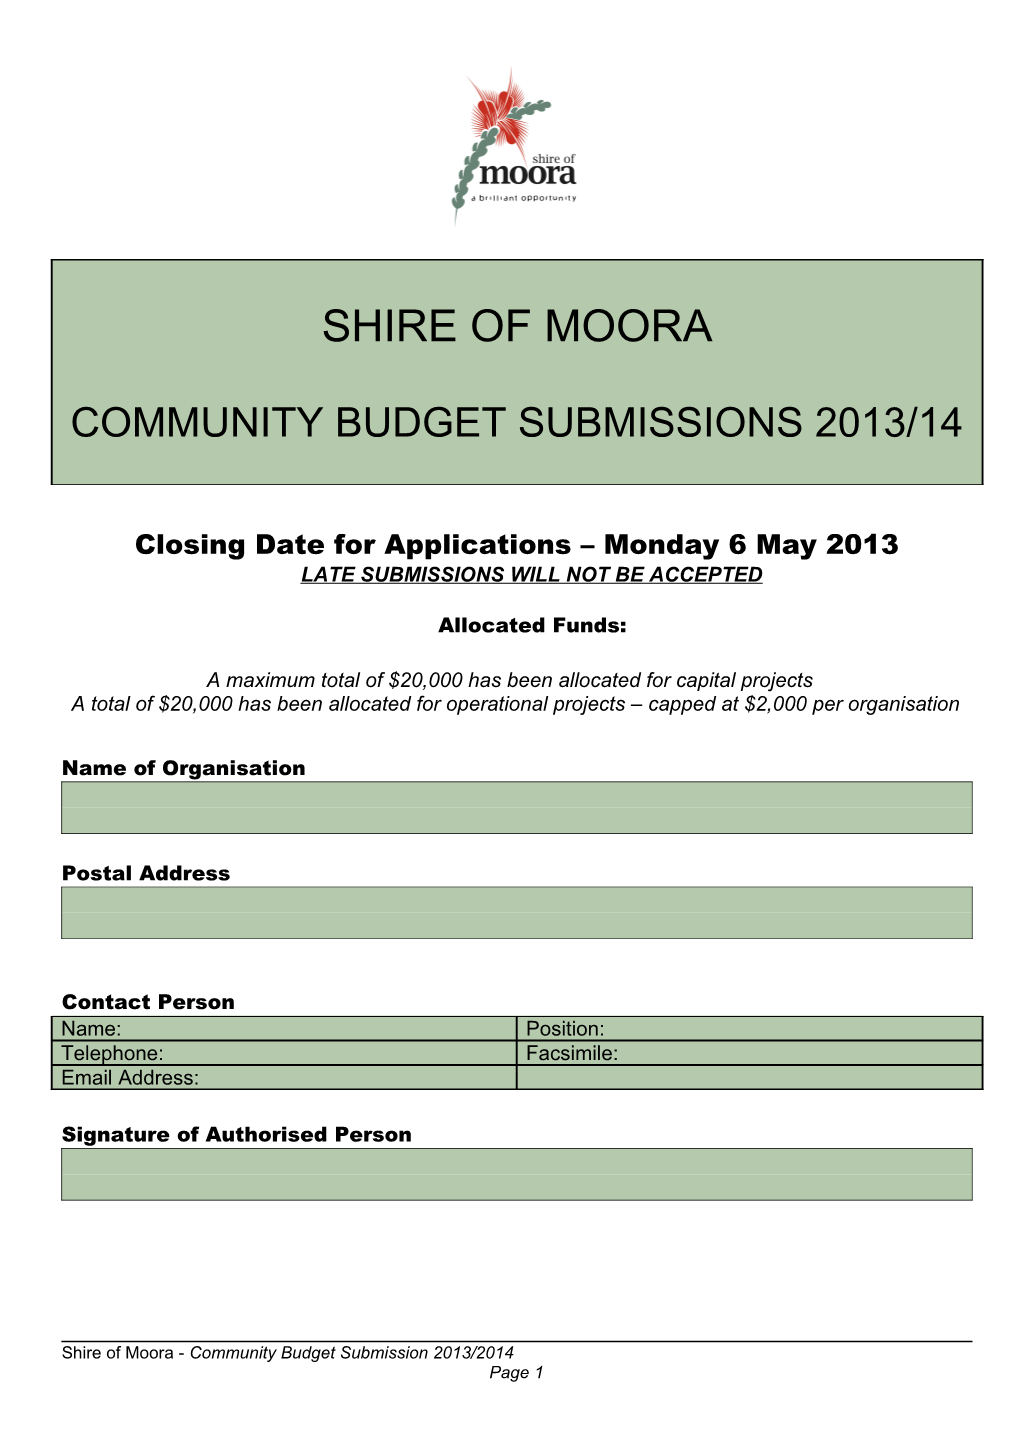 Closing Date for Applications Monday 6 May 2013